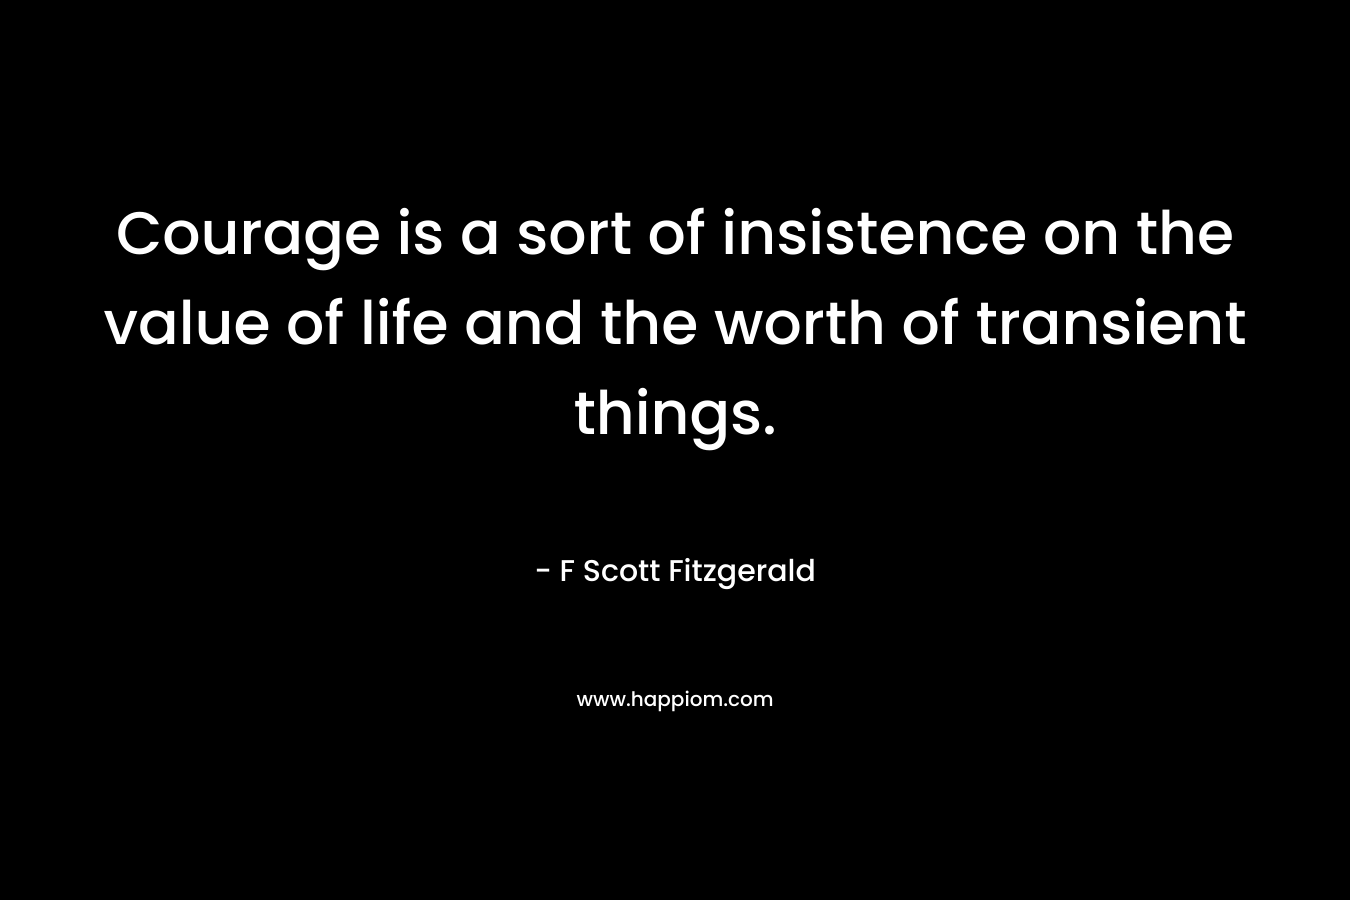 Courage is a sort of insistence on the value of life and the worth of transient things. – F Scott Fitzgerald